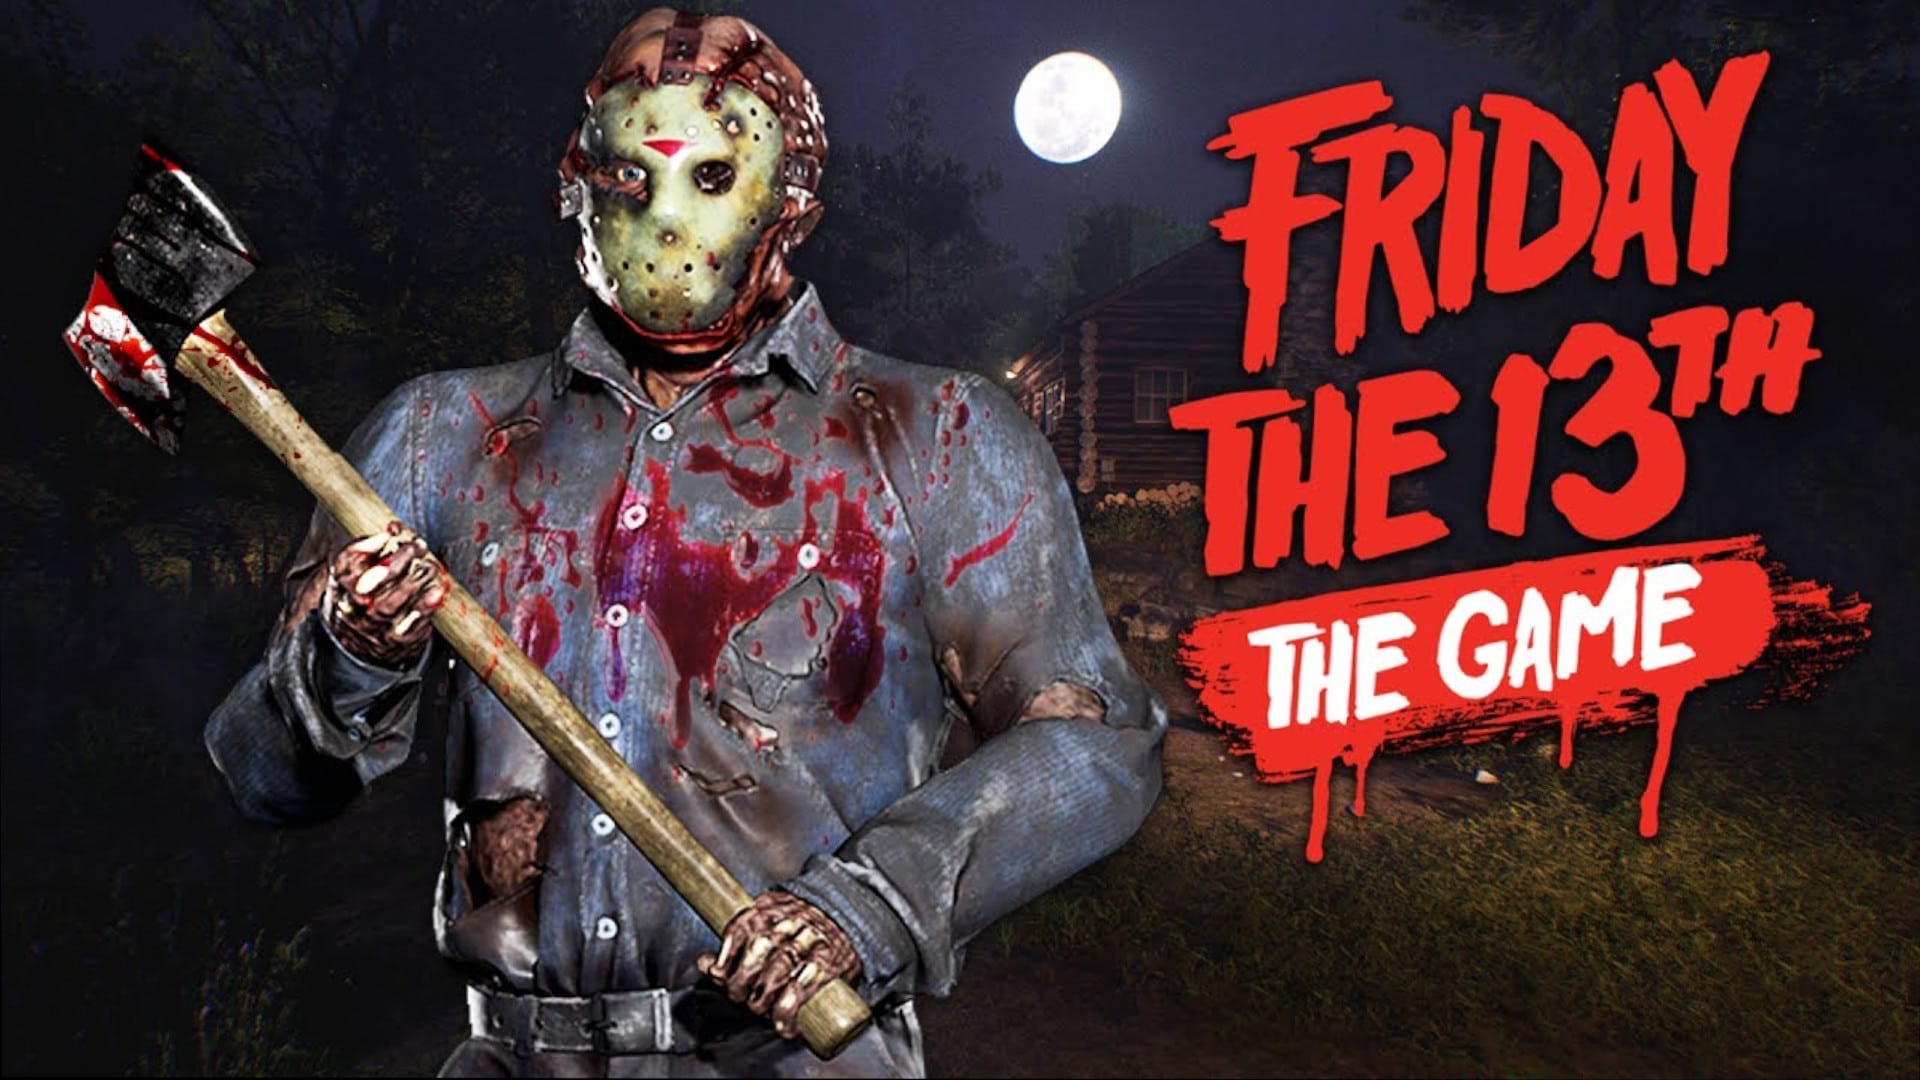 Development To Cease For Friday The 13th: The Game Following Next Patch